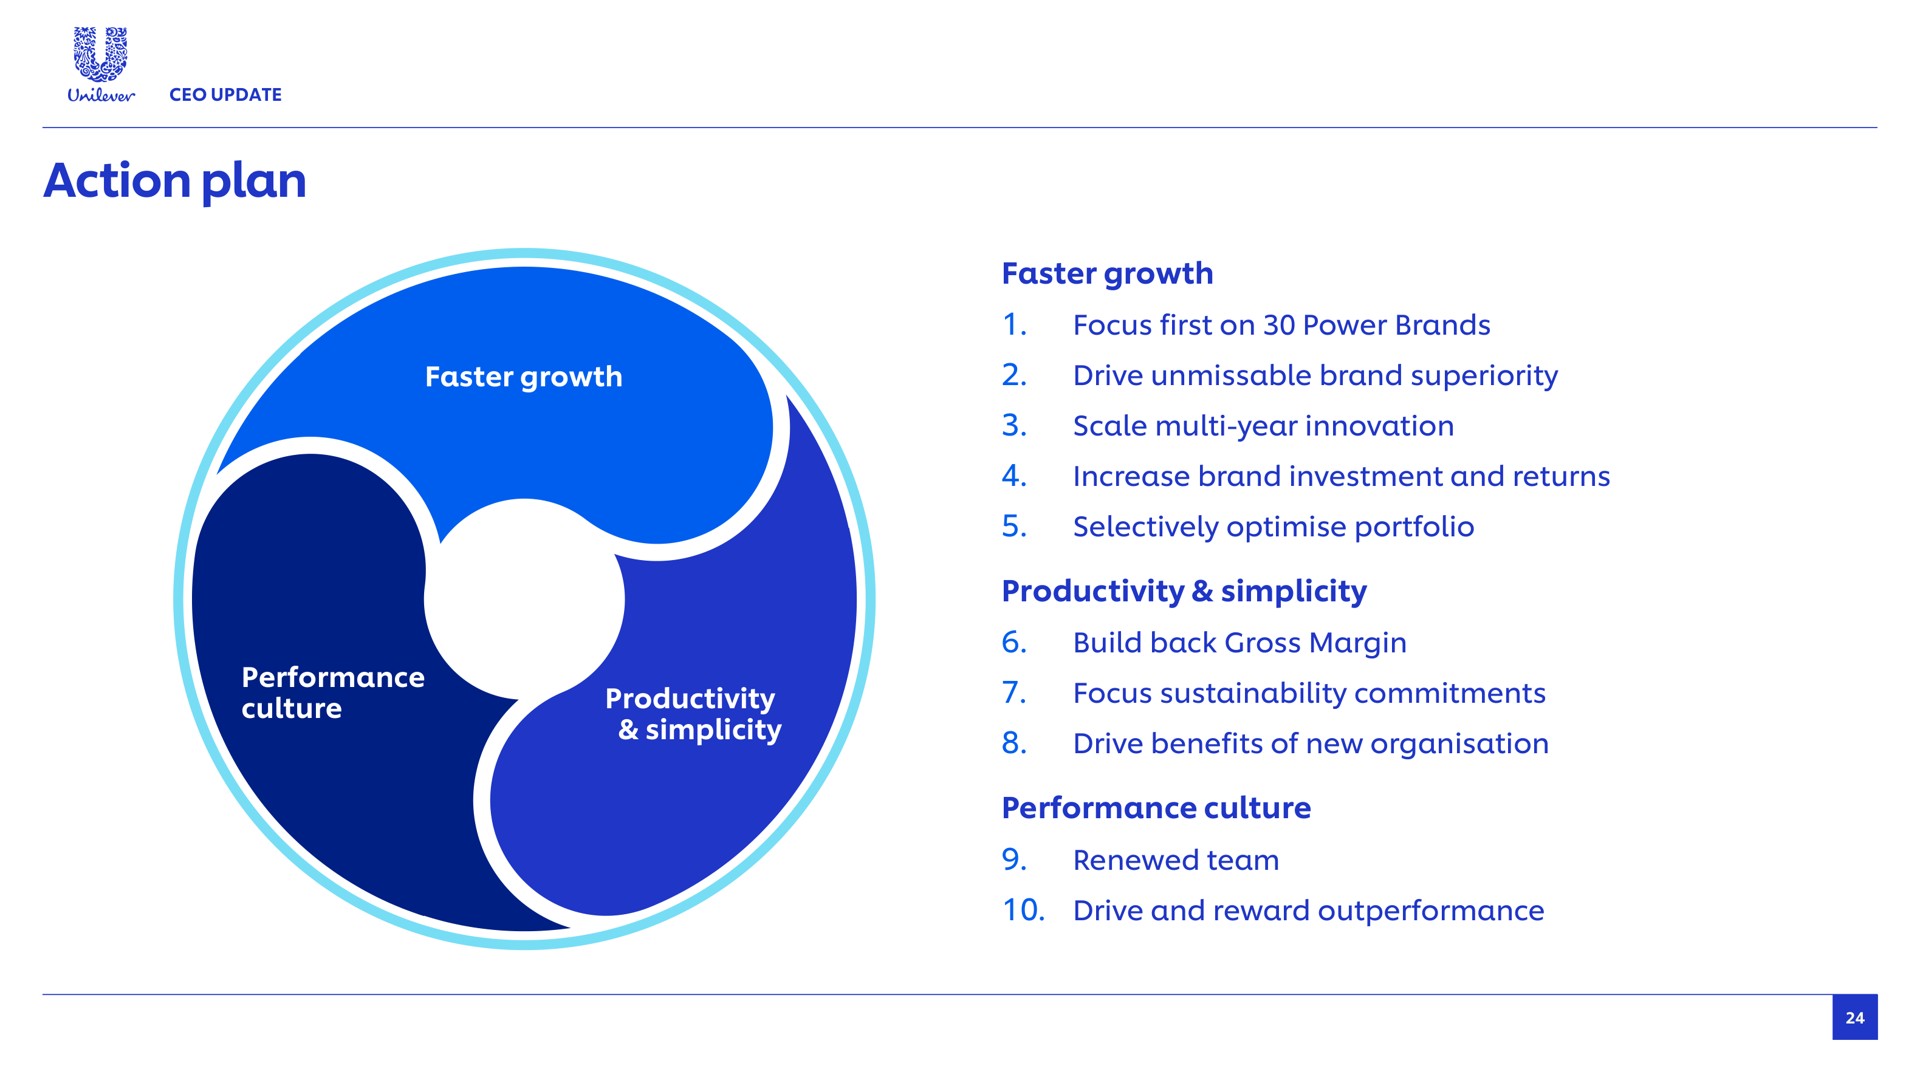 action plan aes wey faster growth productivity performance culture eel faster growth focus first on power brands drive unmissable brand superiority scale year innovation increase brand investment and returns selectively portfolio productivity simplicity build back gross margin focus commitments drive benefits of new performance culture renewed team drive and reward | Unilever